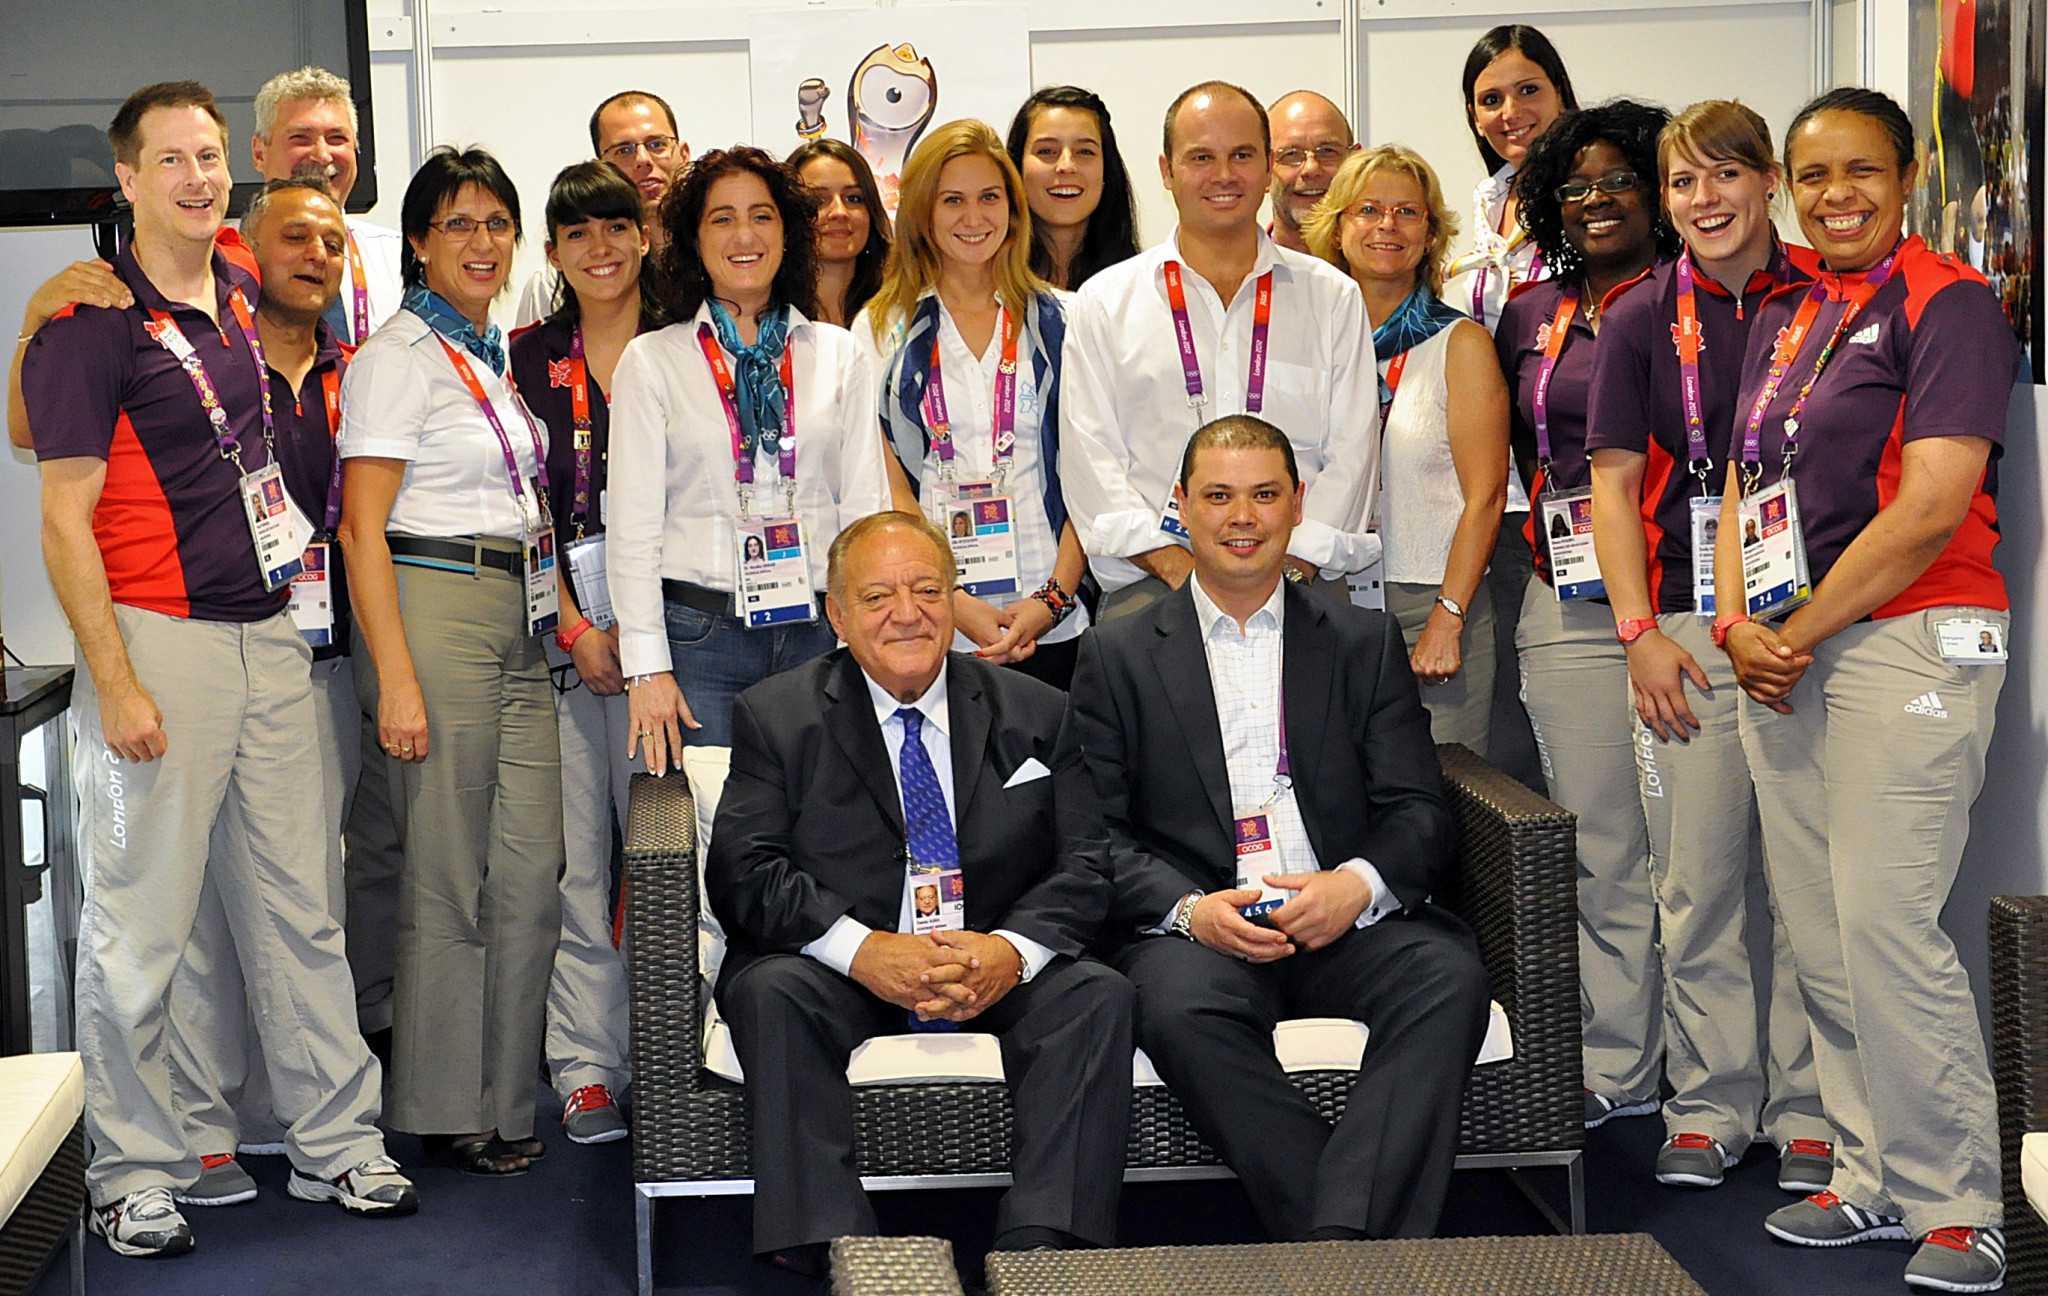 Matthew Curtain, right, seated right, with IWF President Tamás Aján, left, and his team at London 2012 where he was the manager for the weightlifting competition ©IWF